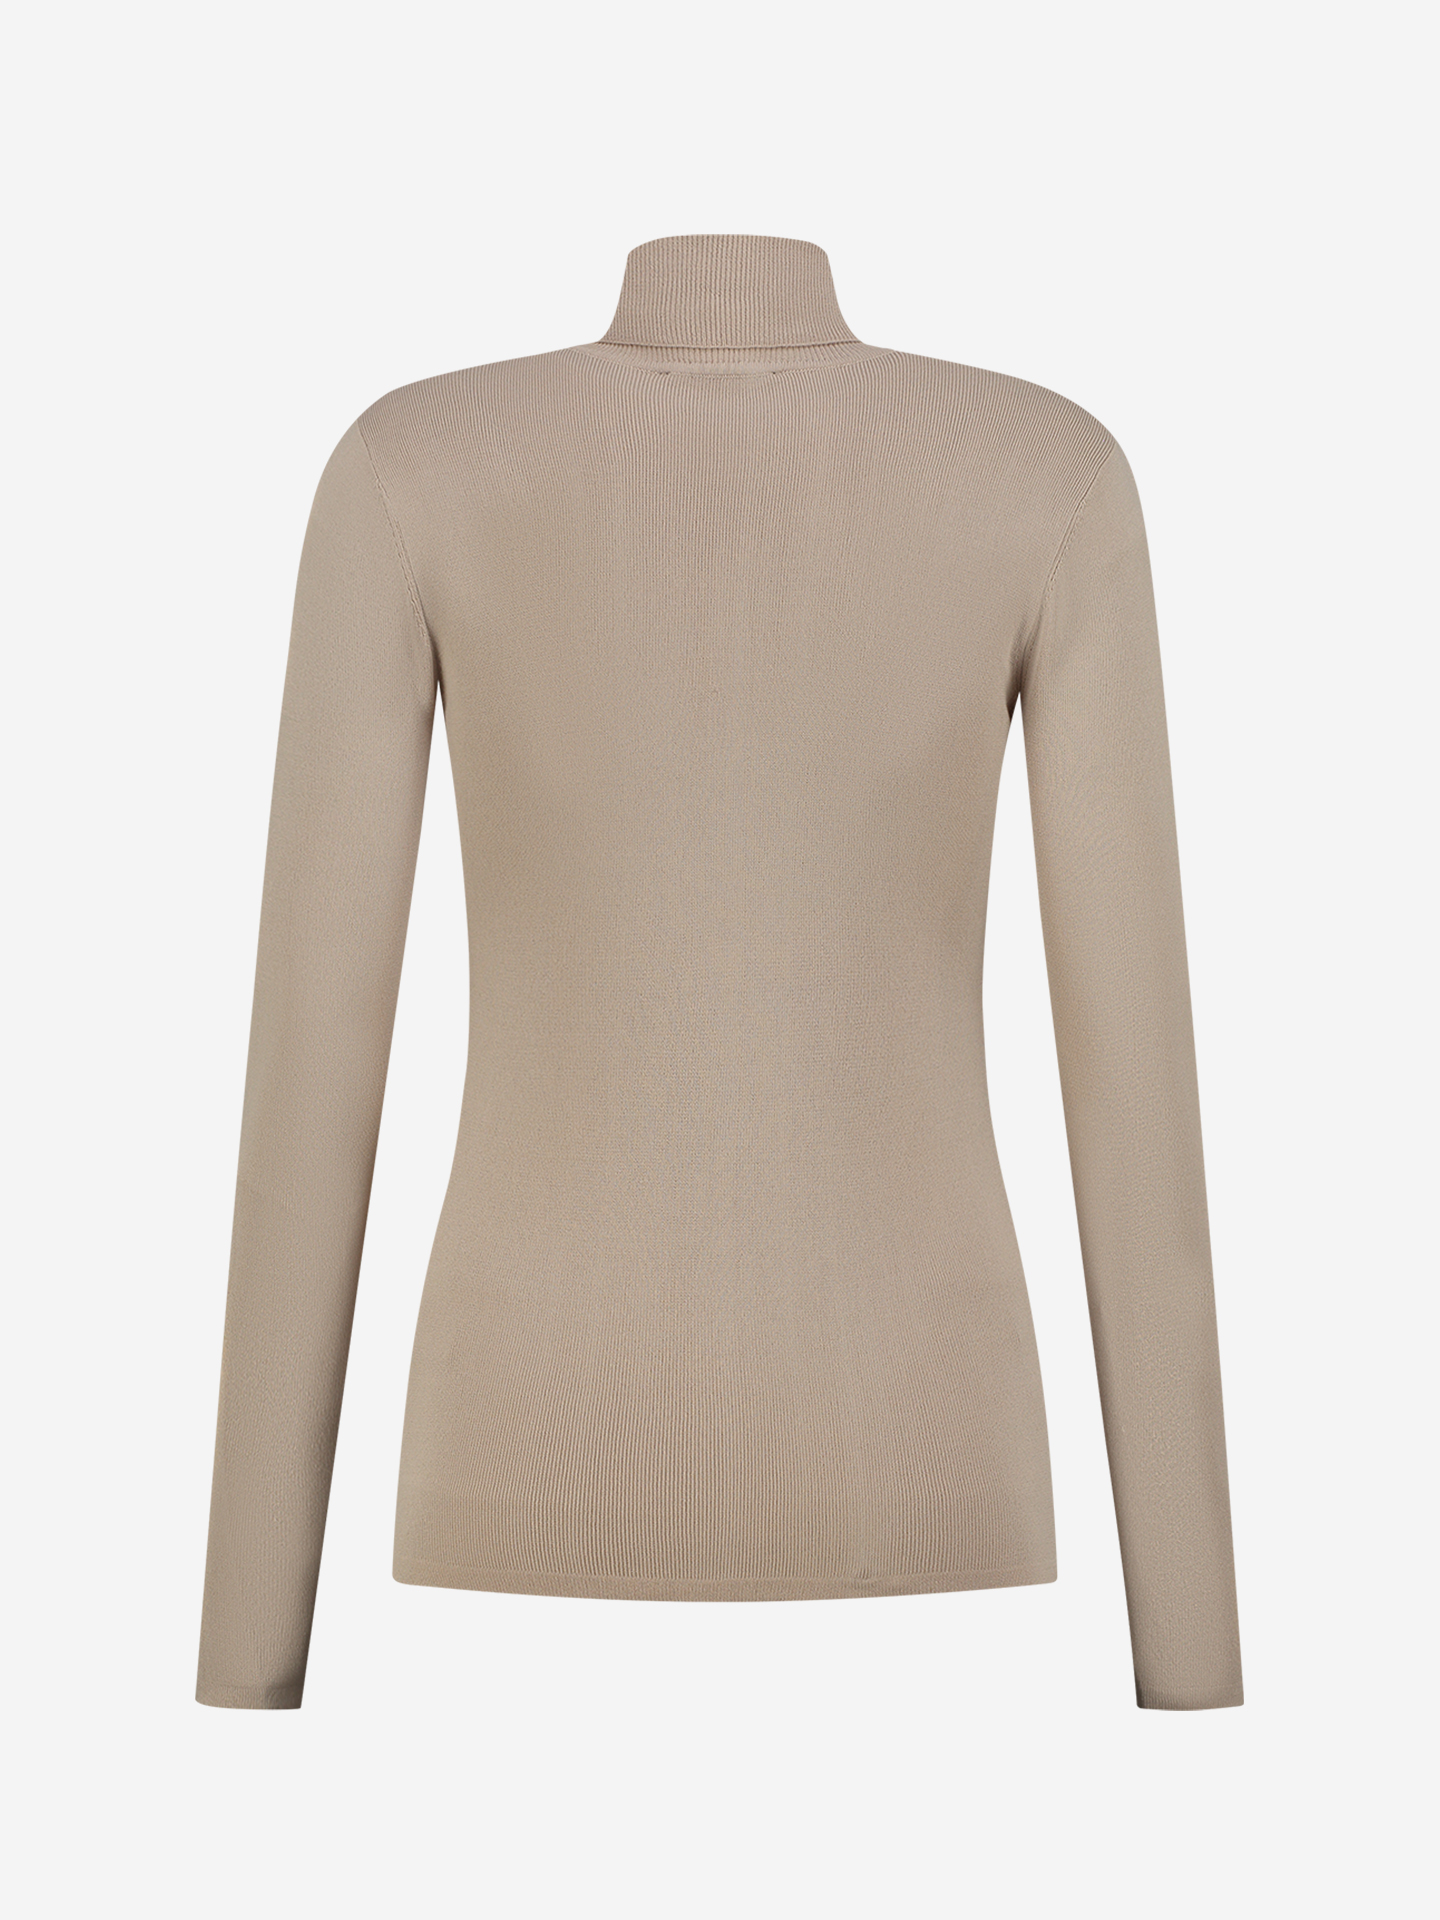 Fitted top with turtle neck